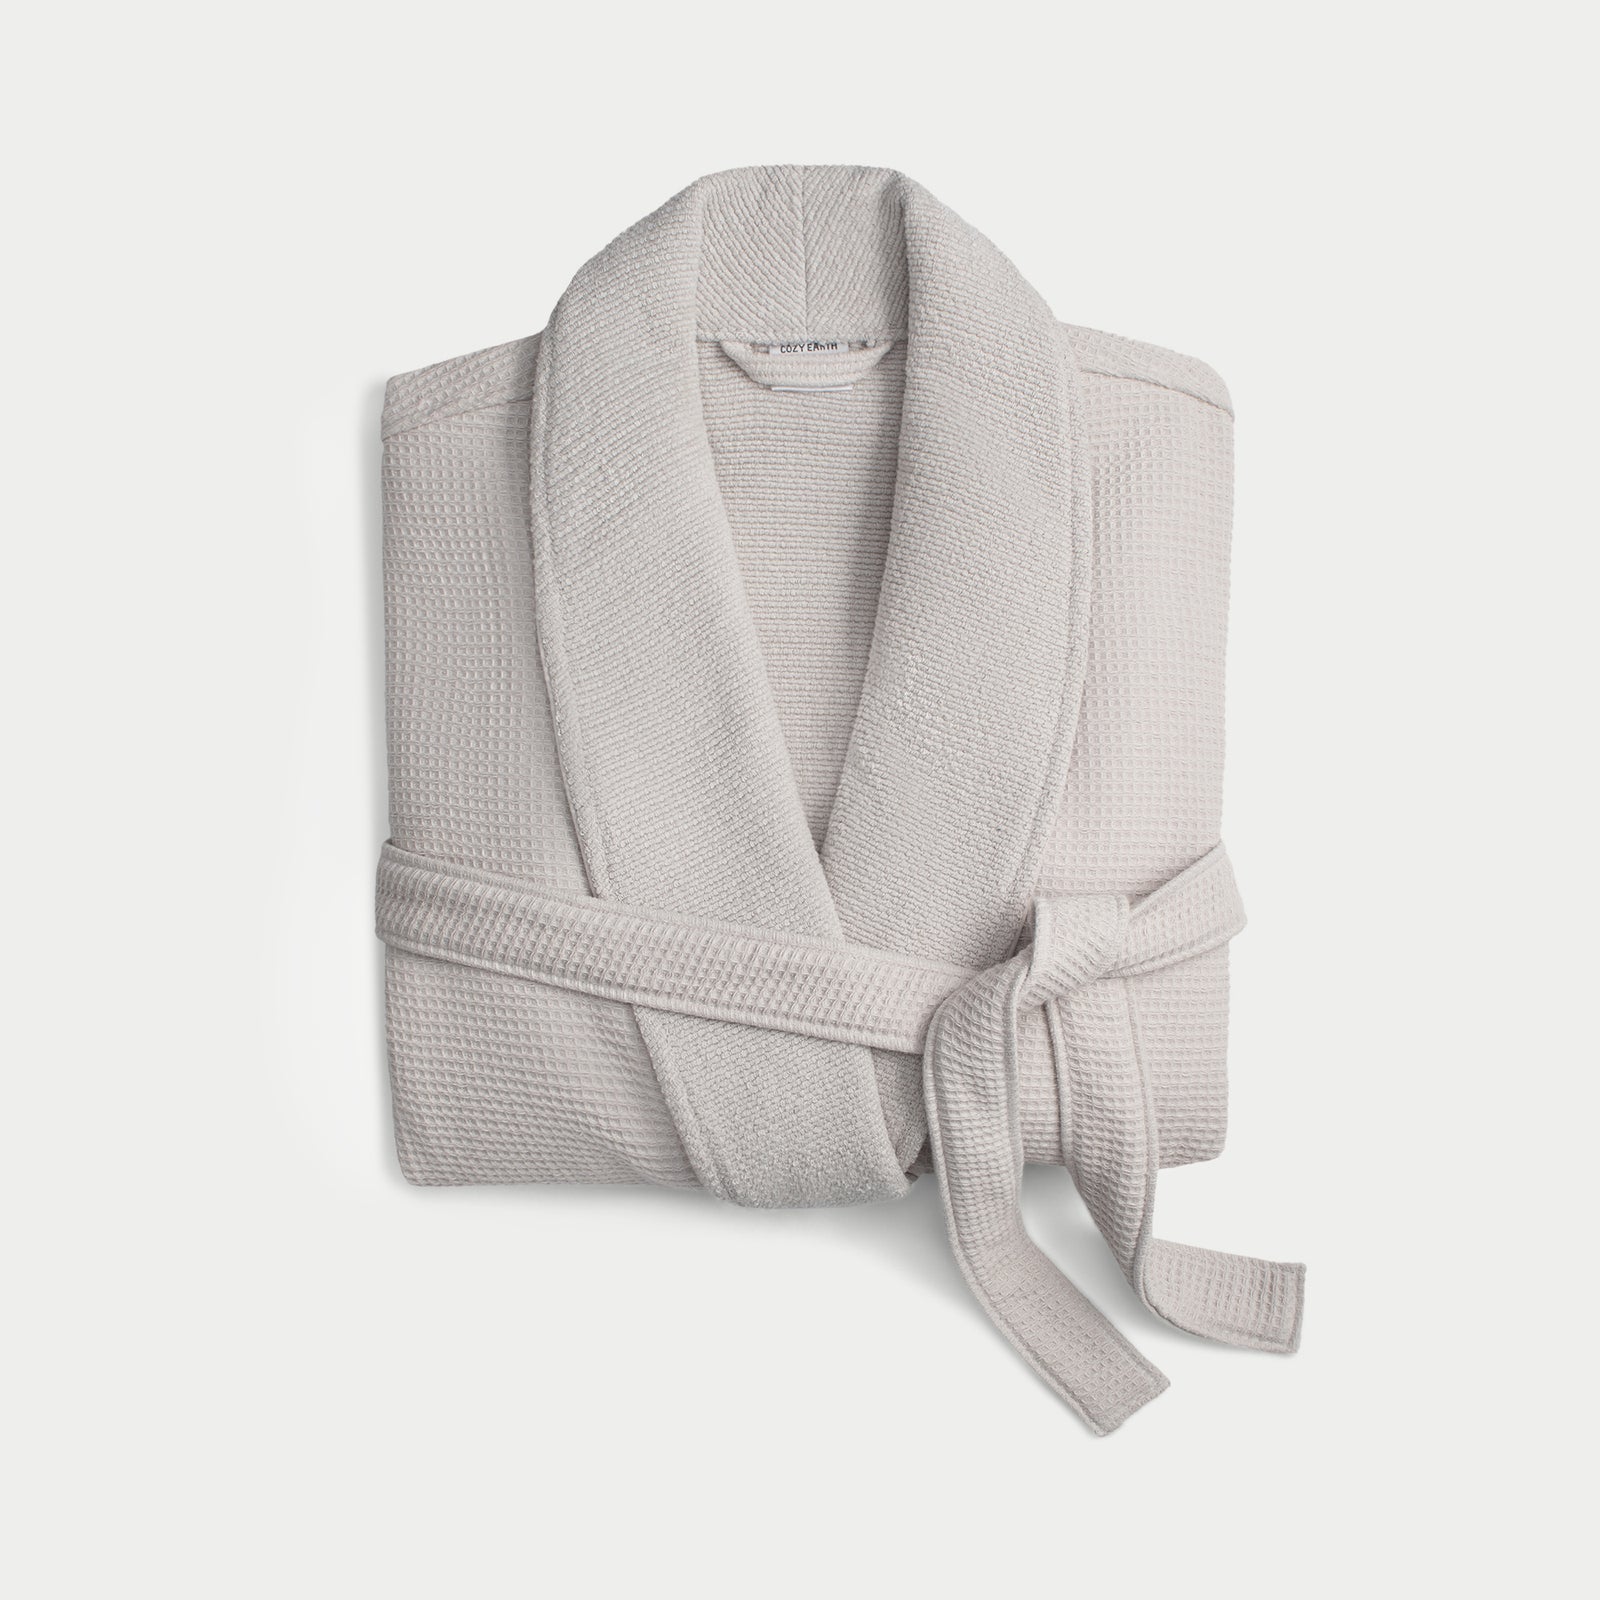 Light grey bamboo waffle knit robe shown neatly folded with a white background. 